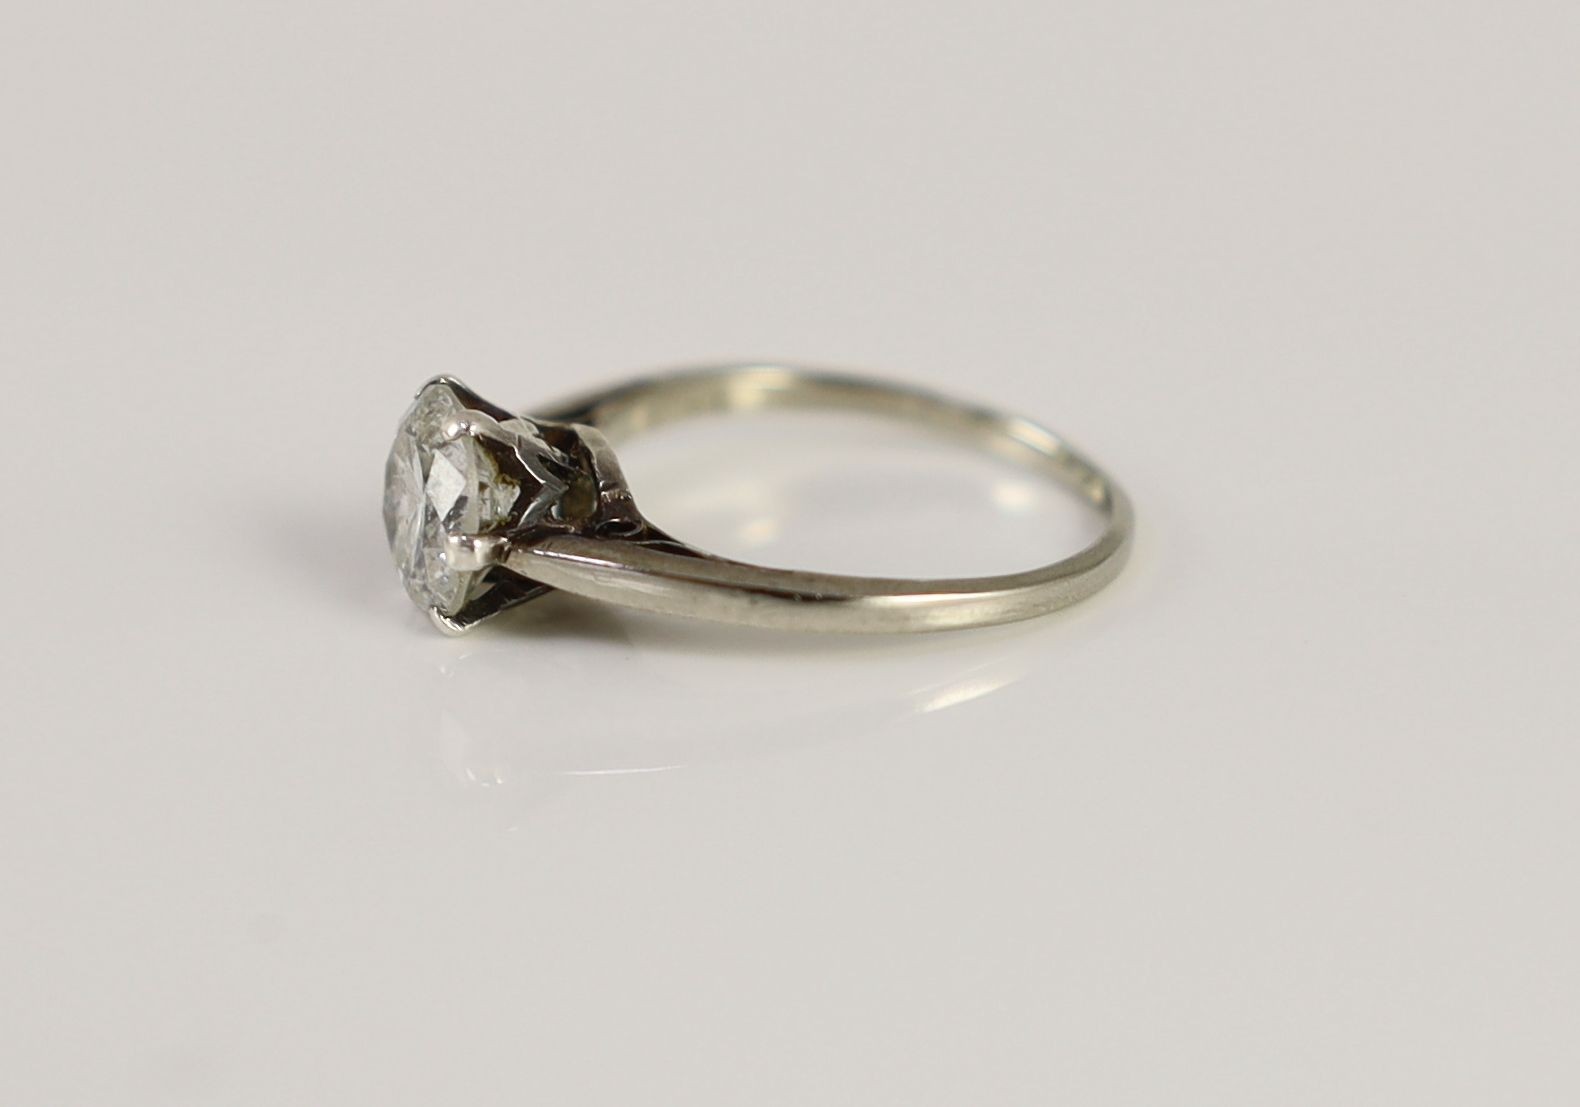 A 9ct white gold and solitaire diamond ring